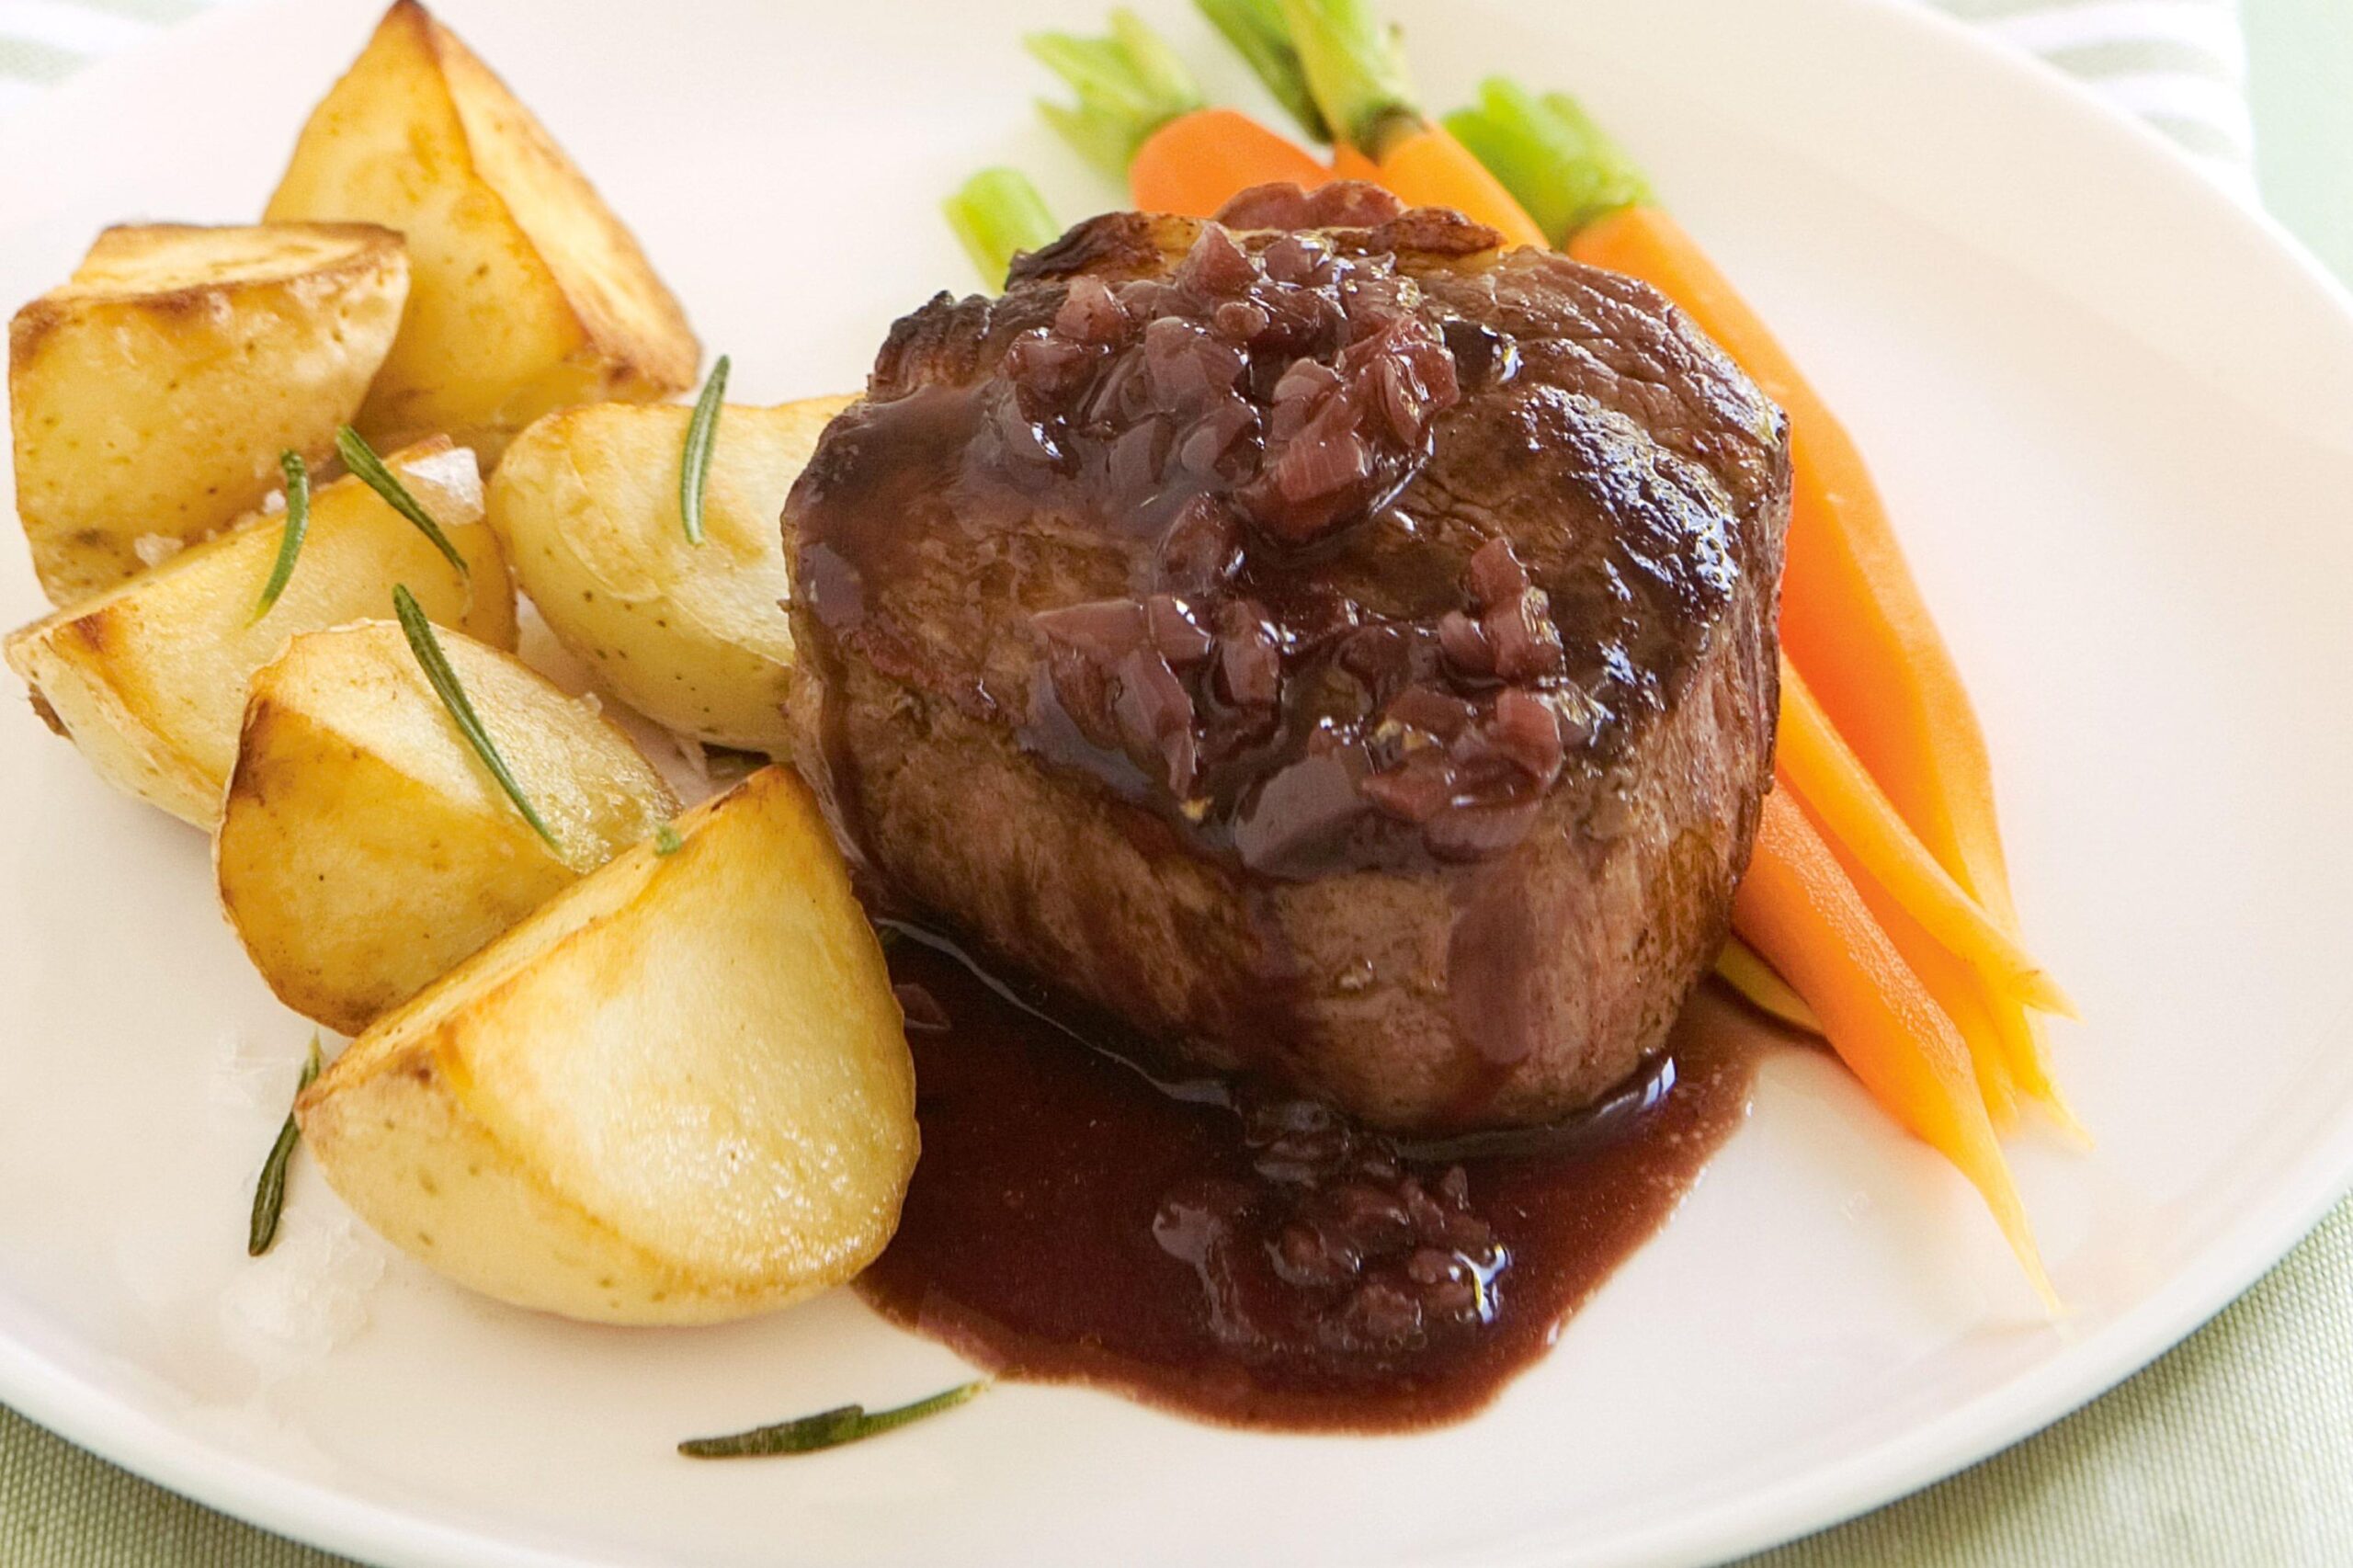  The richness of butter and the depth of red wine come together to create a smooth and irresistible sauce.